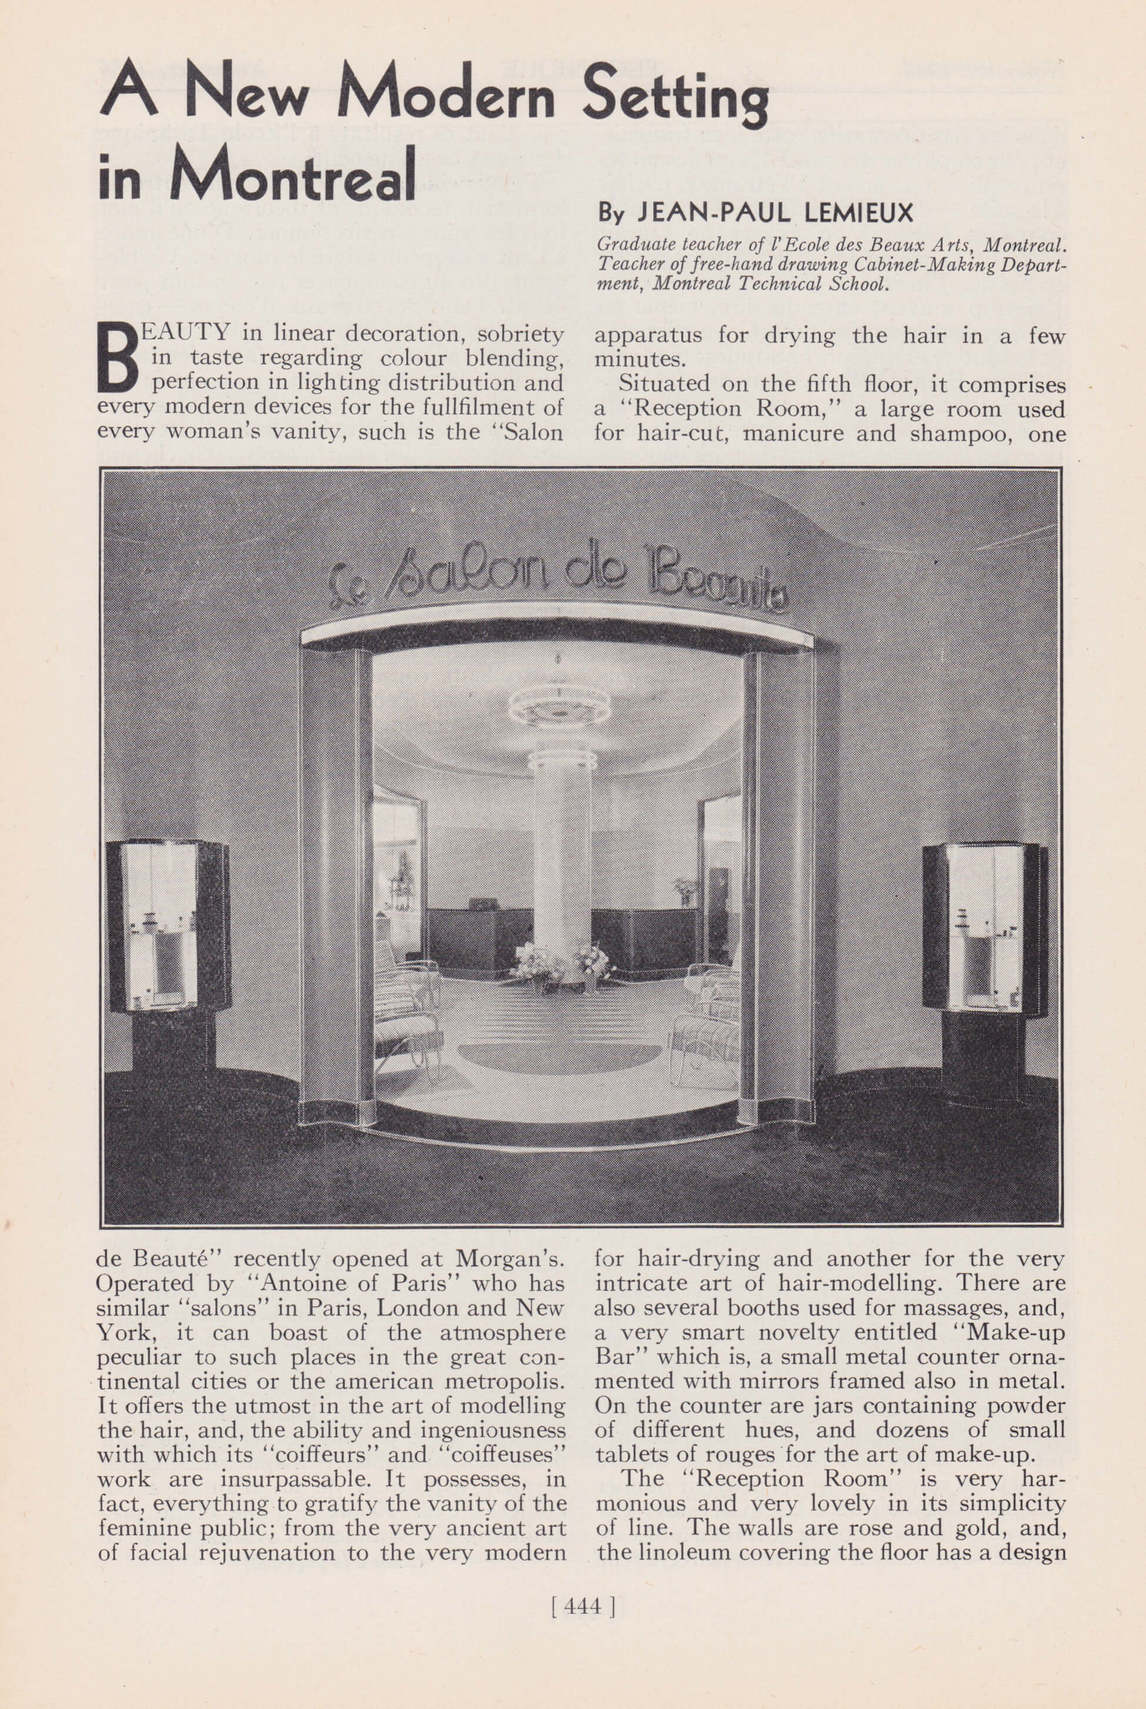 Art Canada Institute, photograph of “A New Modern Setting in Montreal” article by Jean Paul Lemieux, 1935